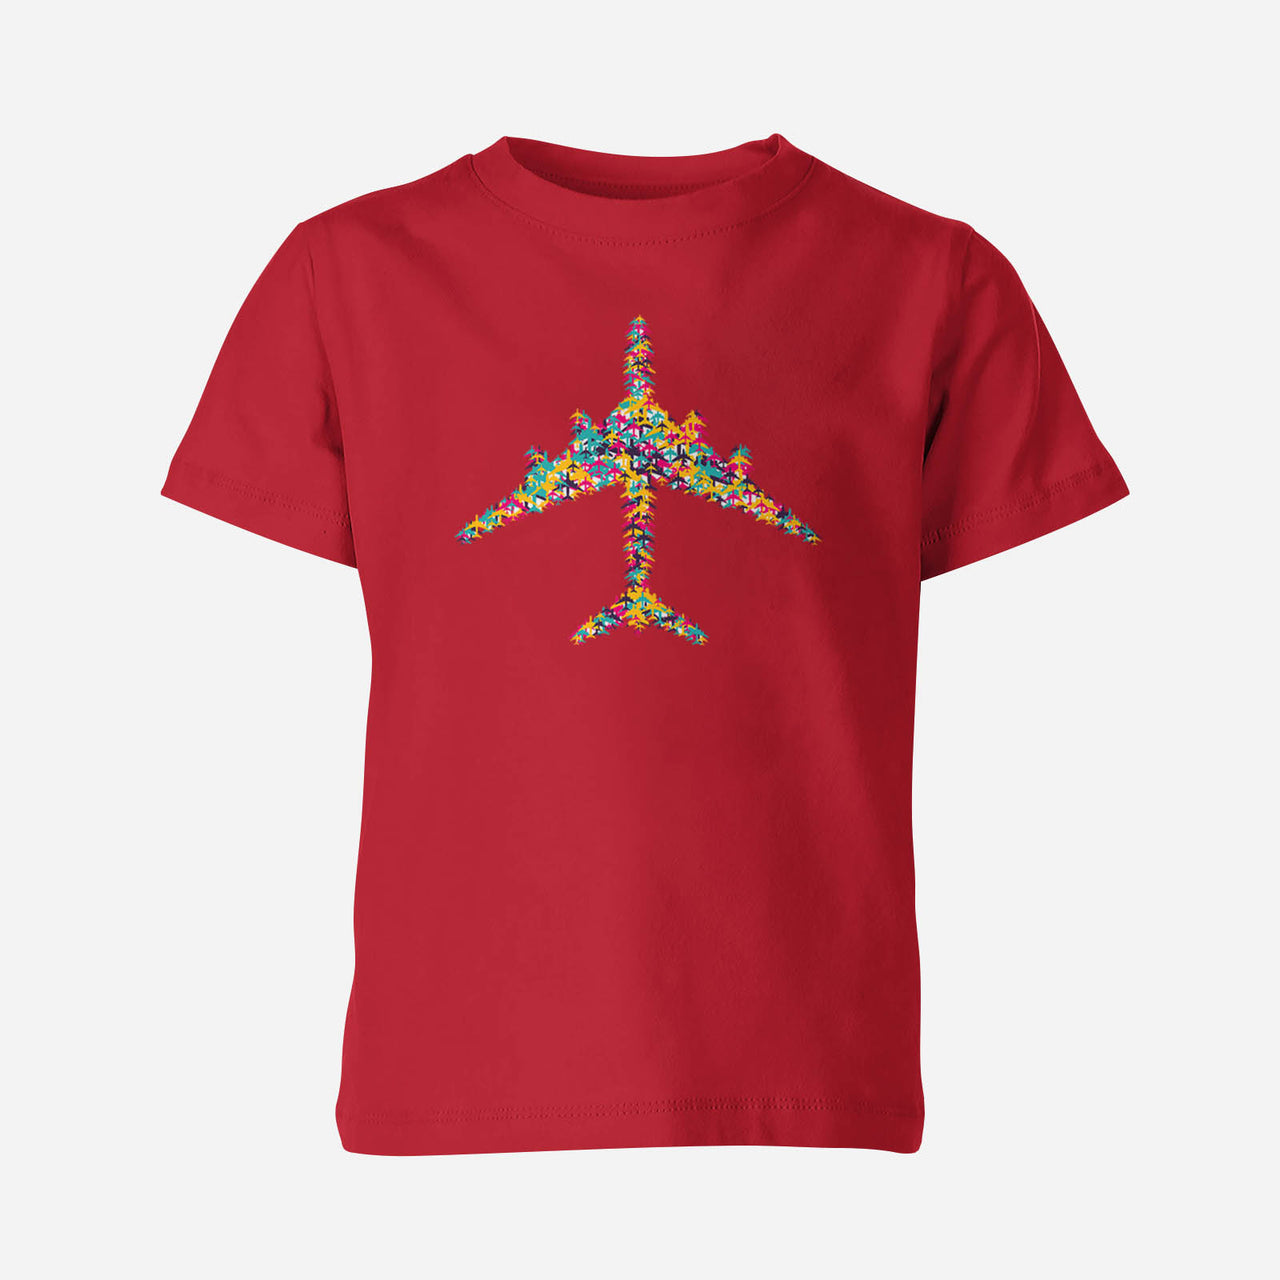 Colourful Airplane Designed Children T-Shirts